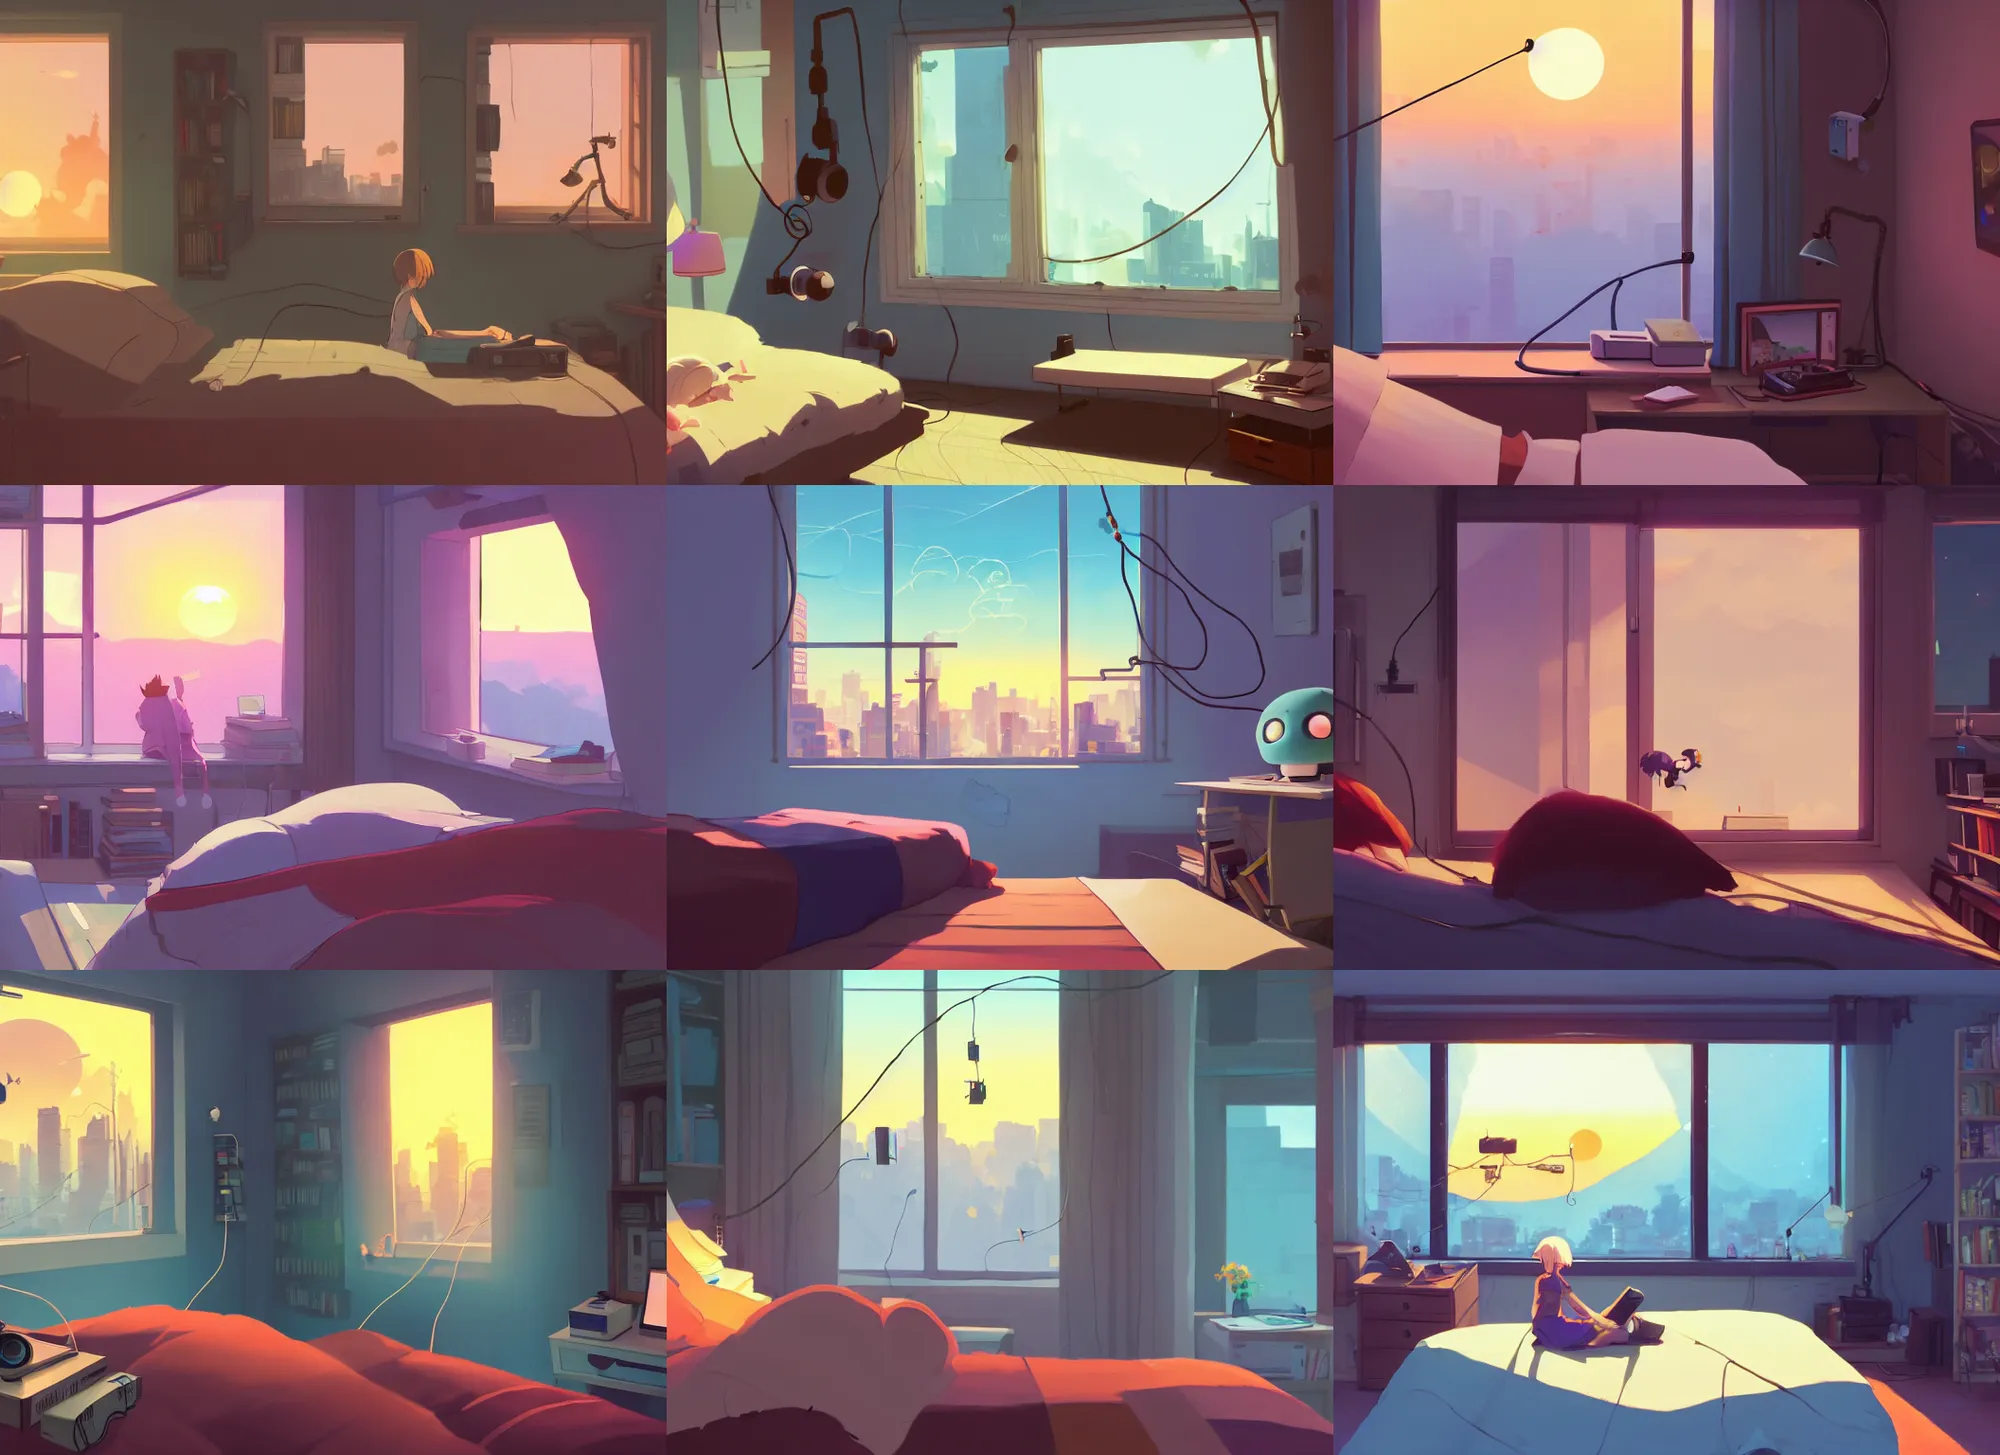 Prompt: bedroom, gamecube, books, wires, window looking out over city, detailed, cory loftis, james gilleard, atey ghailan, makoto shinkai, goro fujita, studio ghibli, rim light, exquisite lighting, clear focus, very coherent, plain background, soft painting, sunset